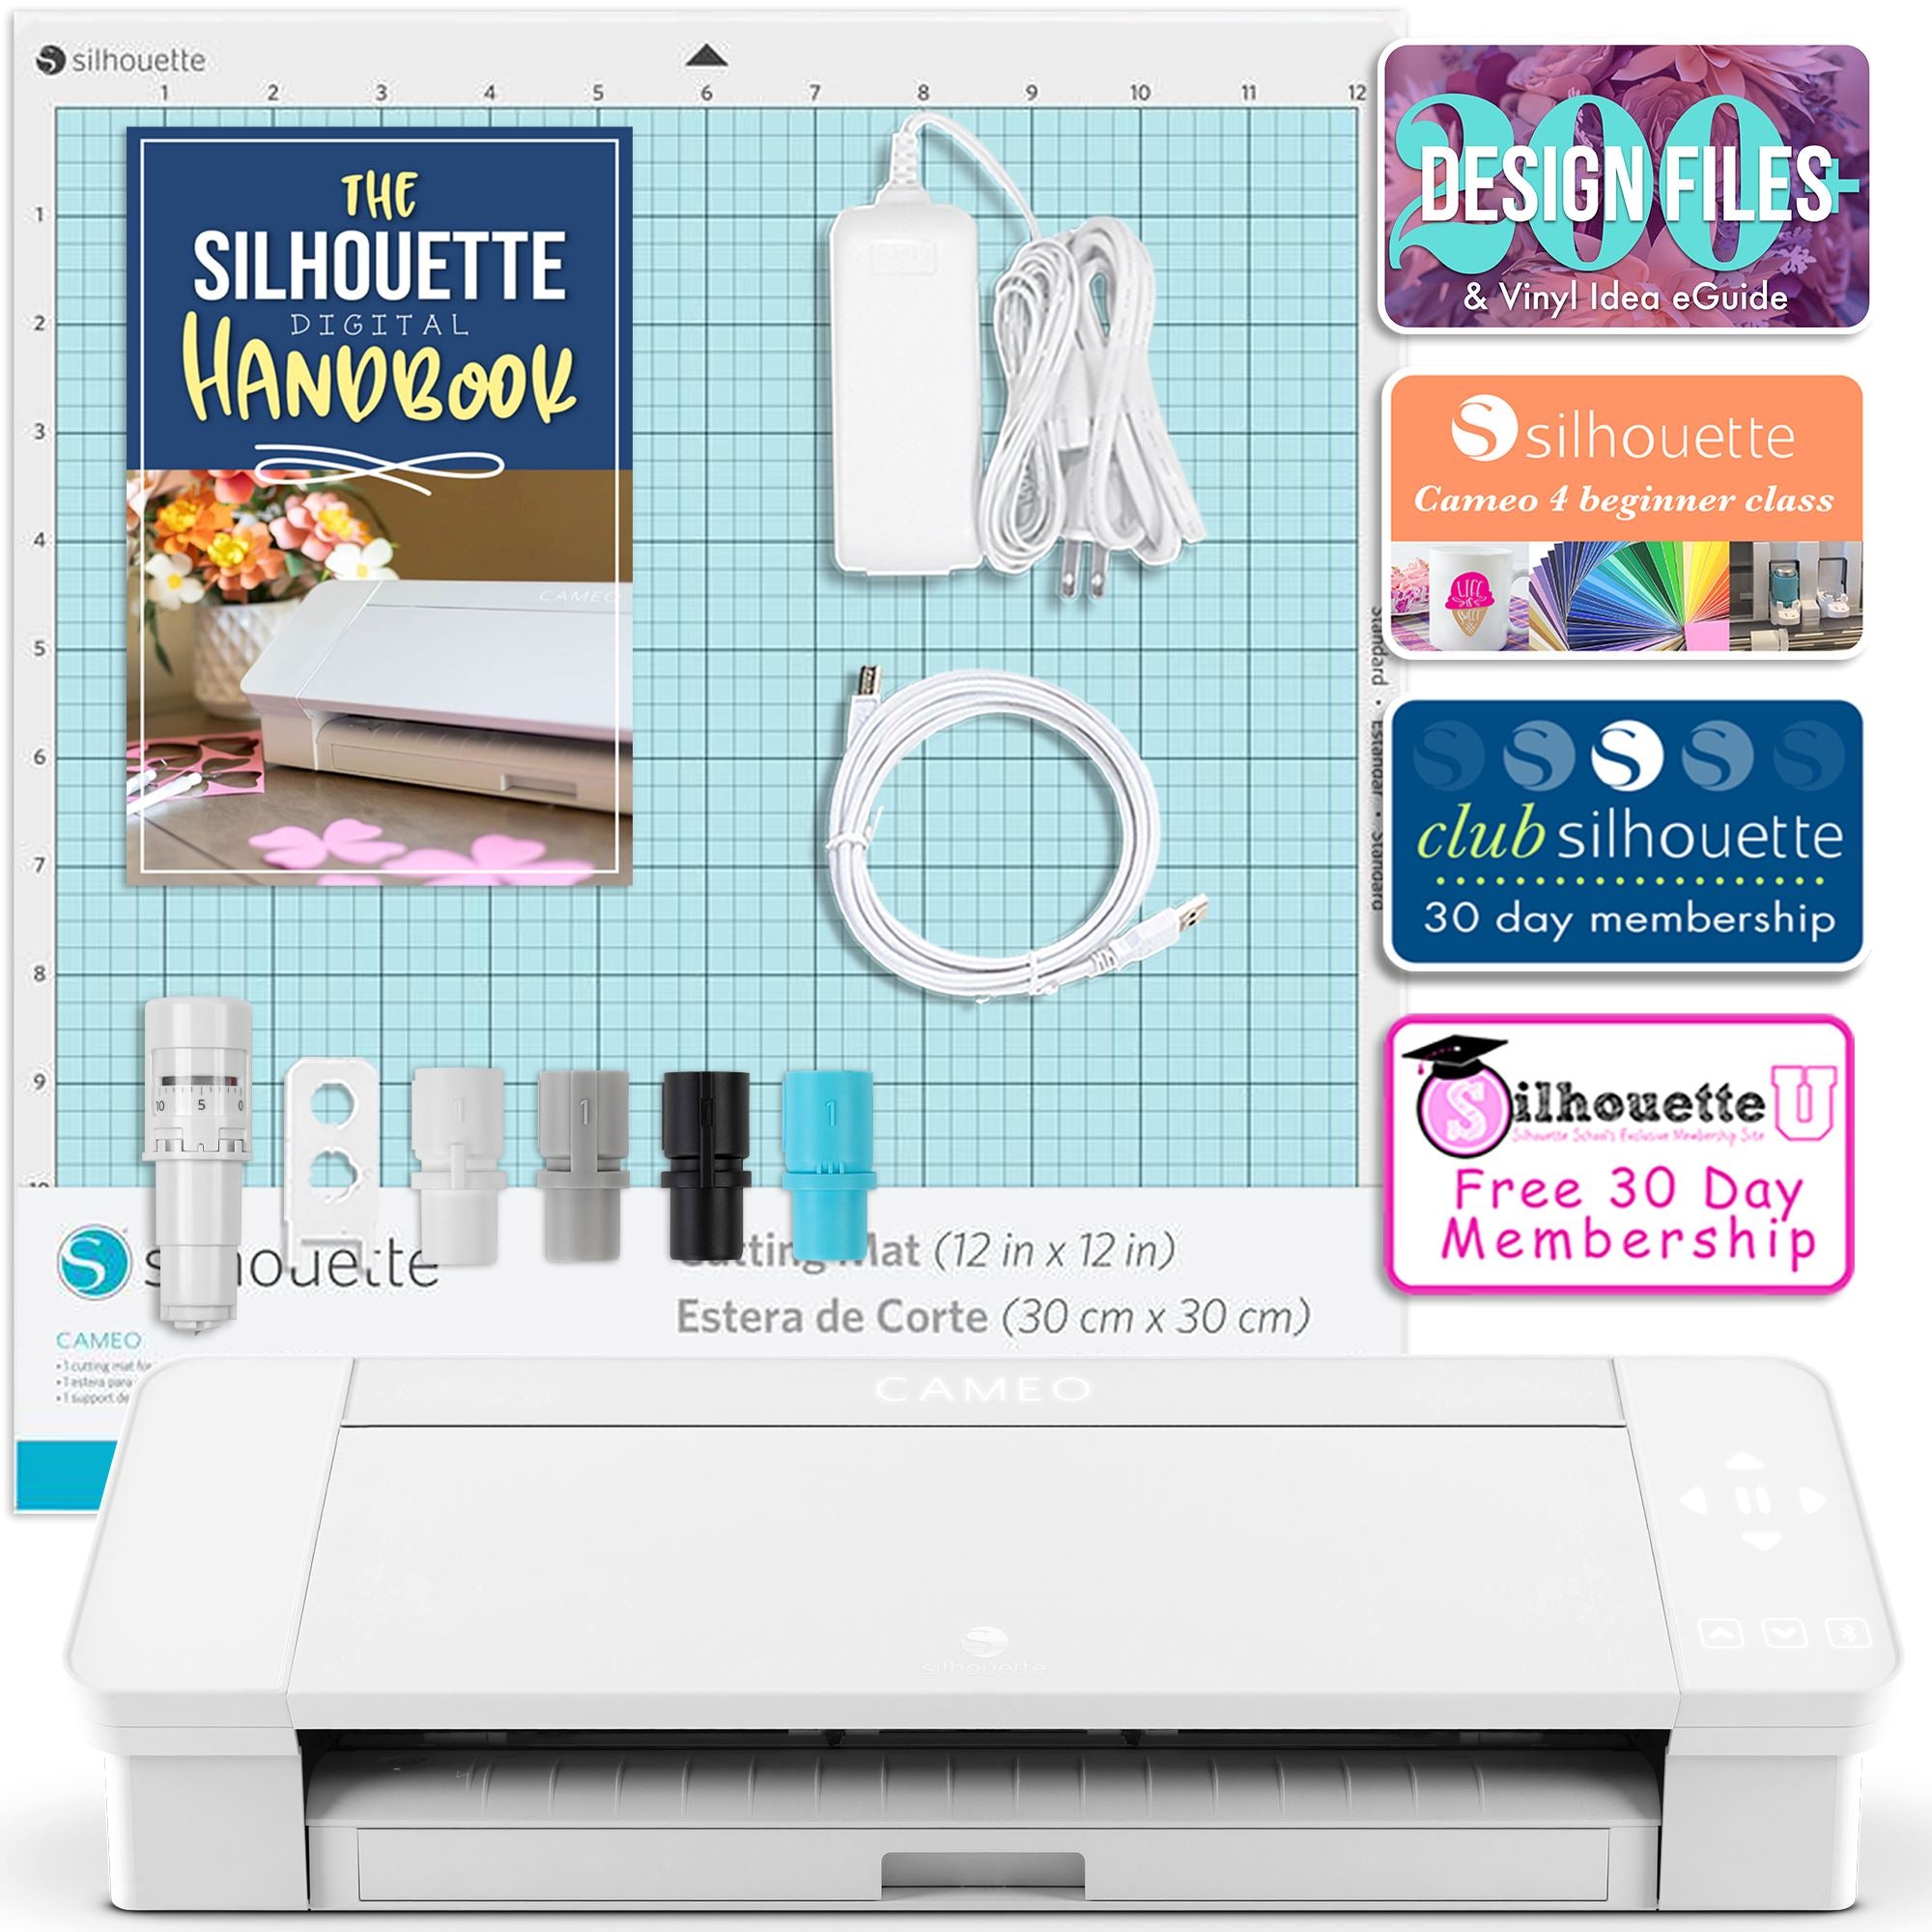 How Can Cricut Mats Be Used In Silhouette Cameo? [Full Guide]